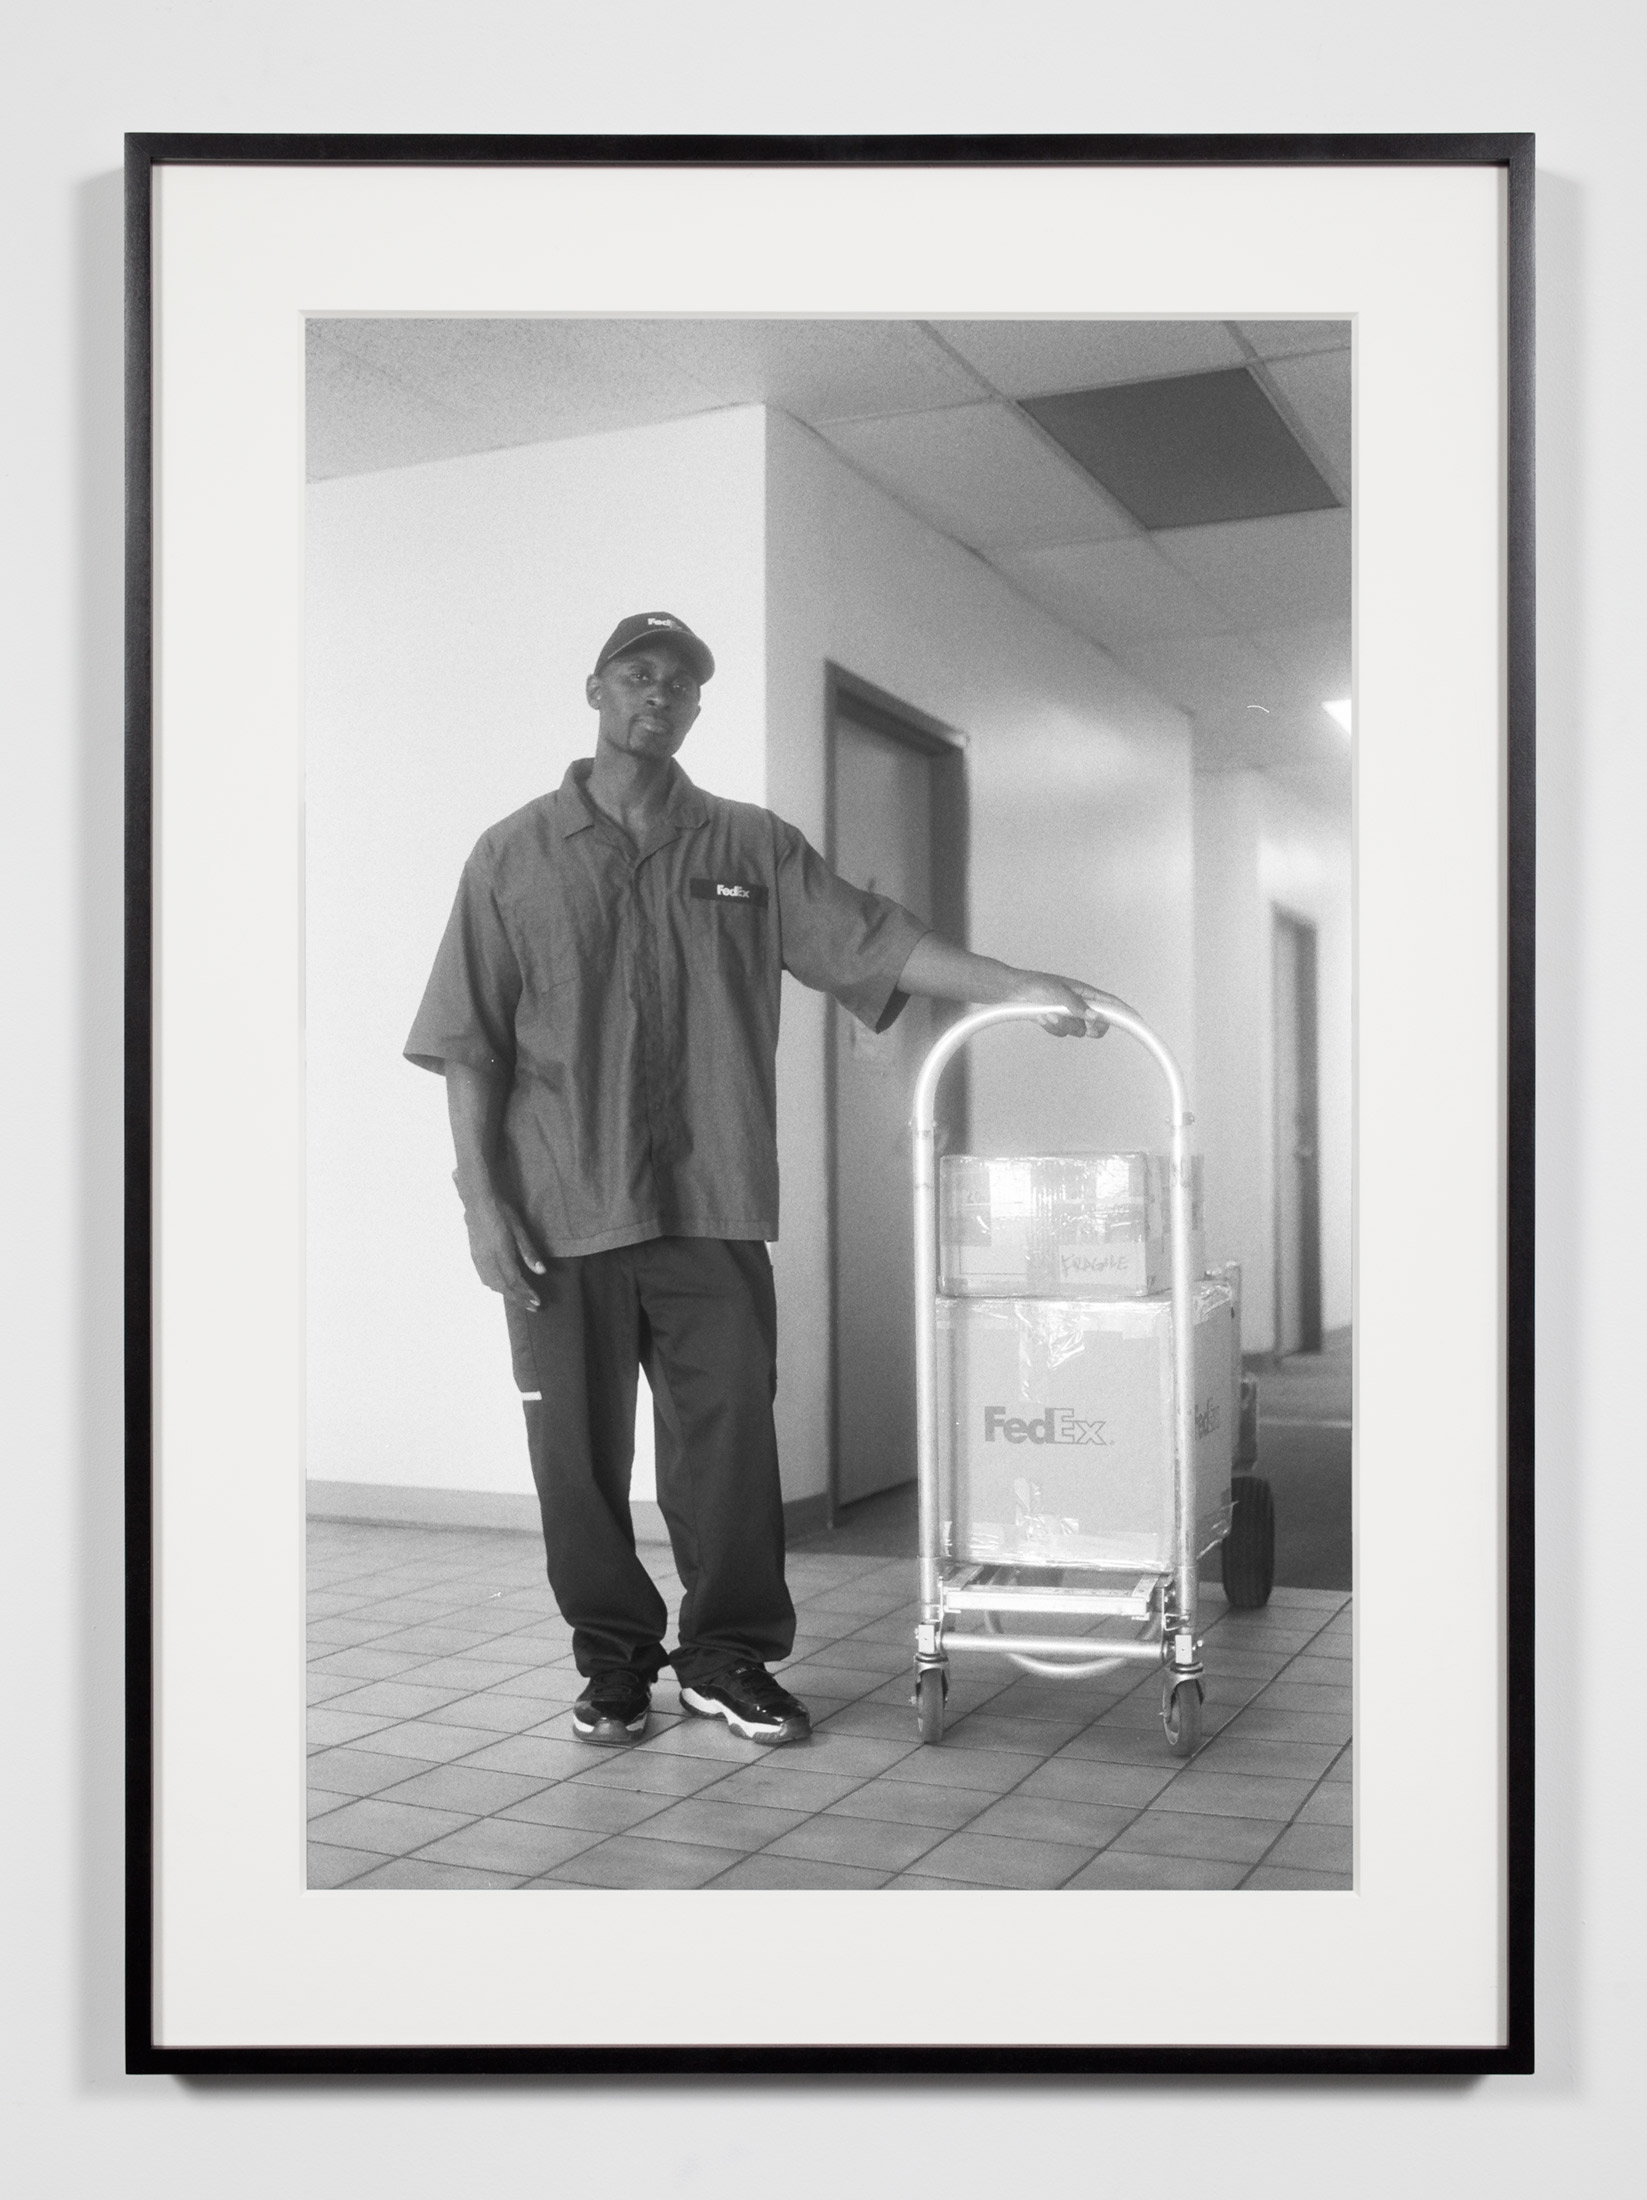   FedEx Courier, Los Angeles, California, September 12, 2008   2011  Epson Ultrachrome K3 archival ink jet print on Hahnemühle Photo Rag paper  36 3/8 x 26 3/8 inches   Industrial Portraits, 2008–    A Diagram of Forces, 2011     